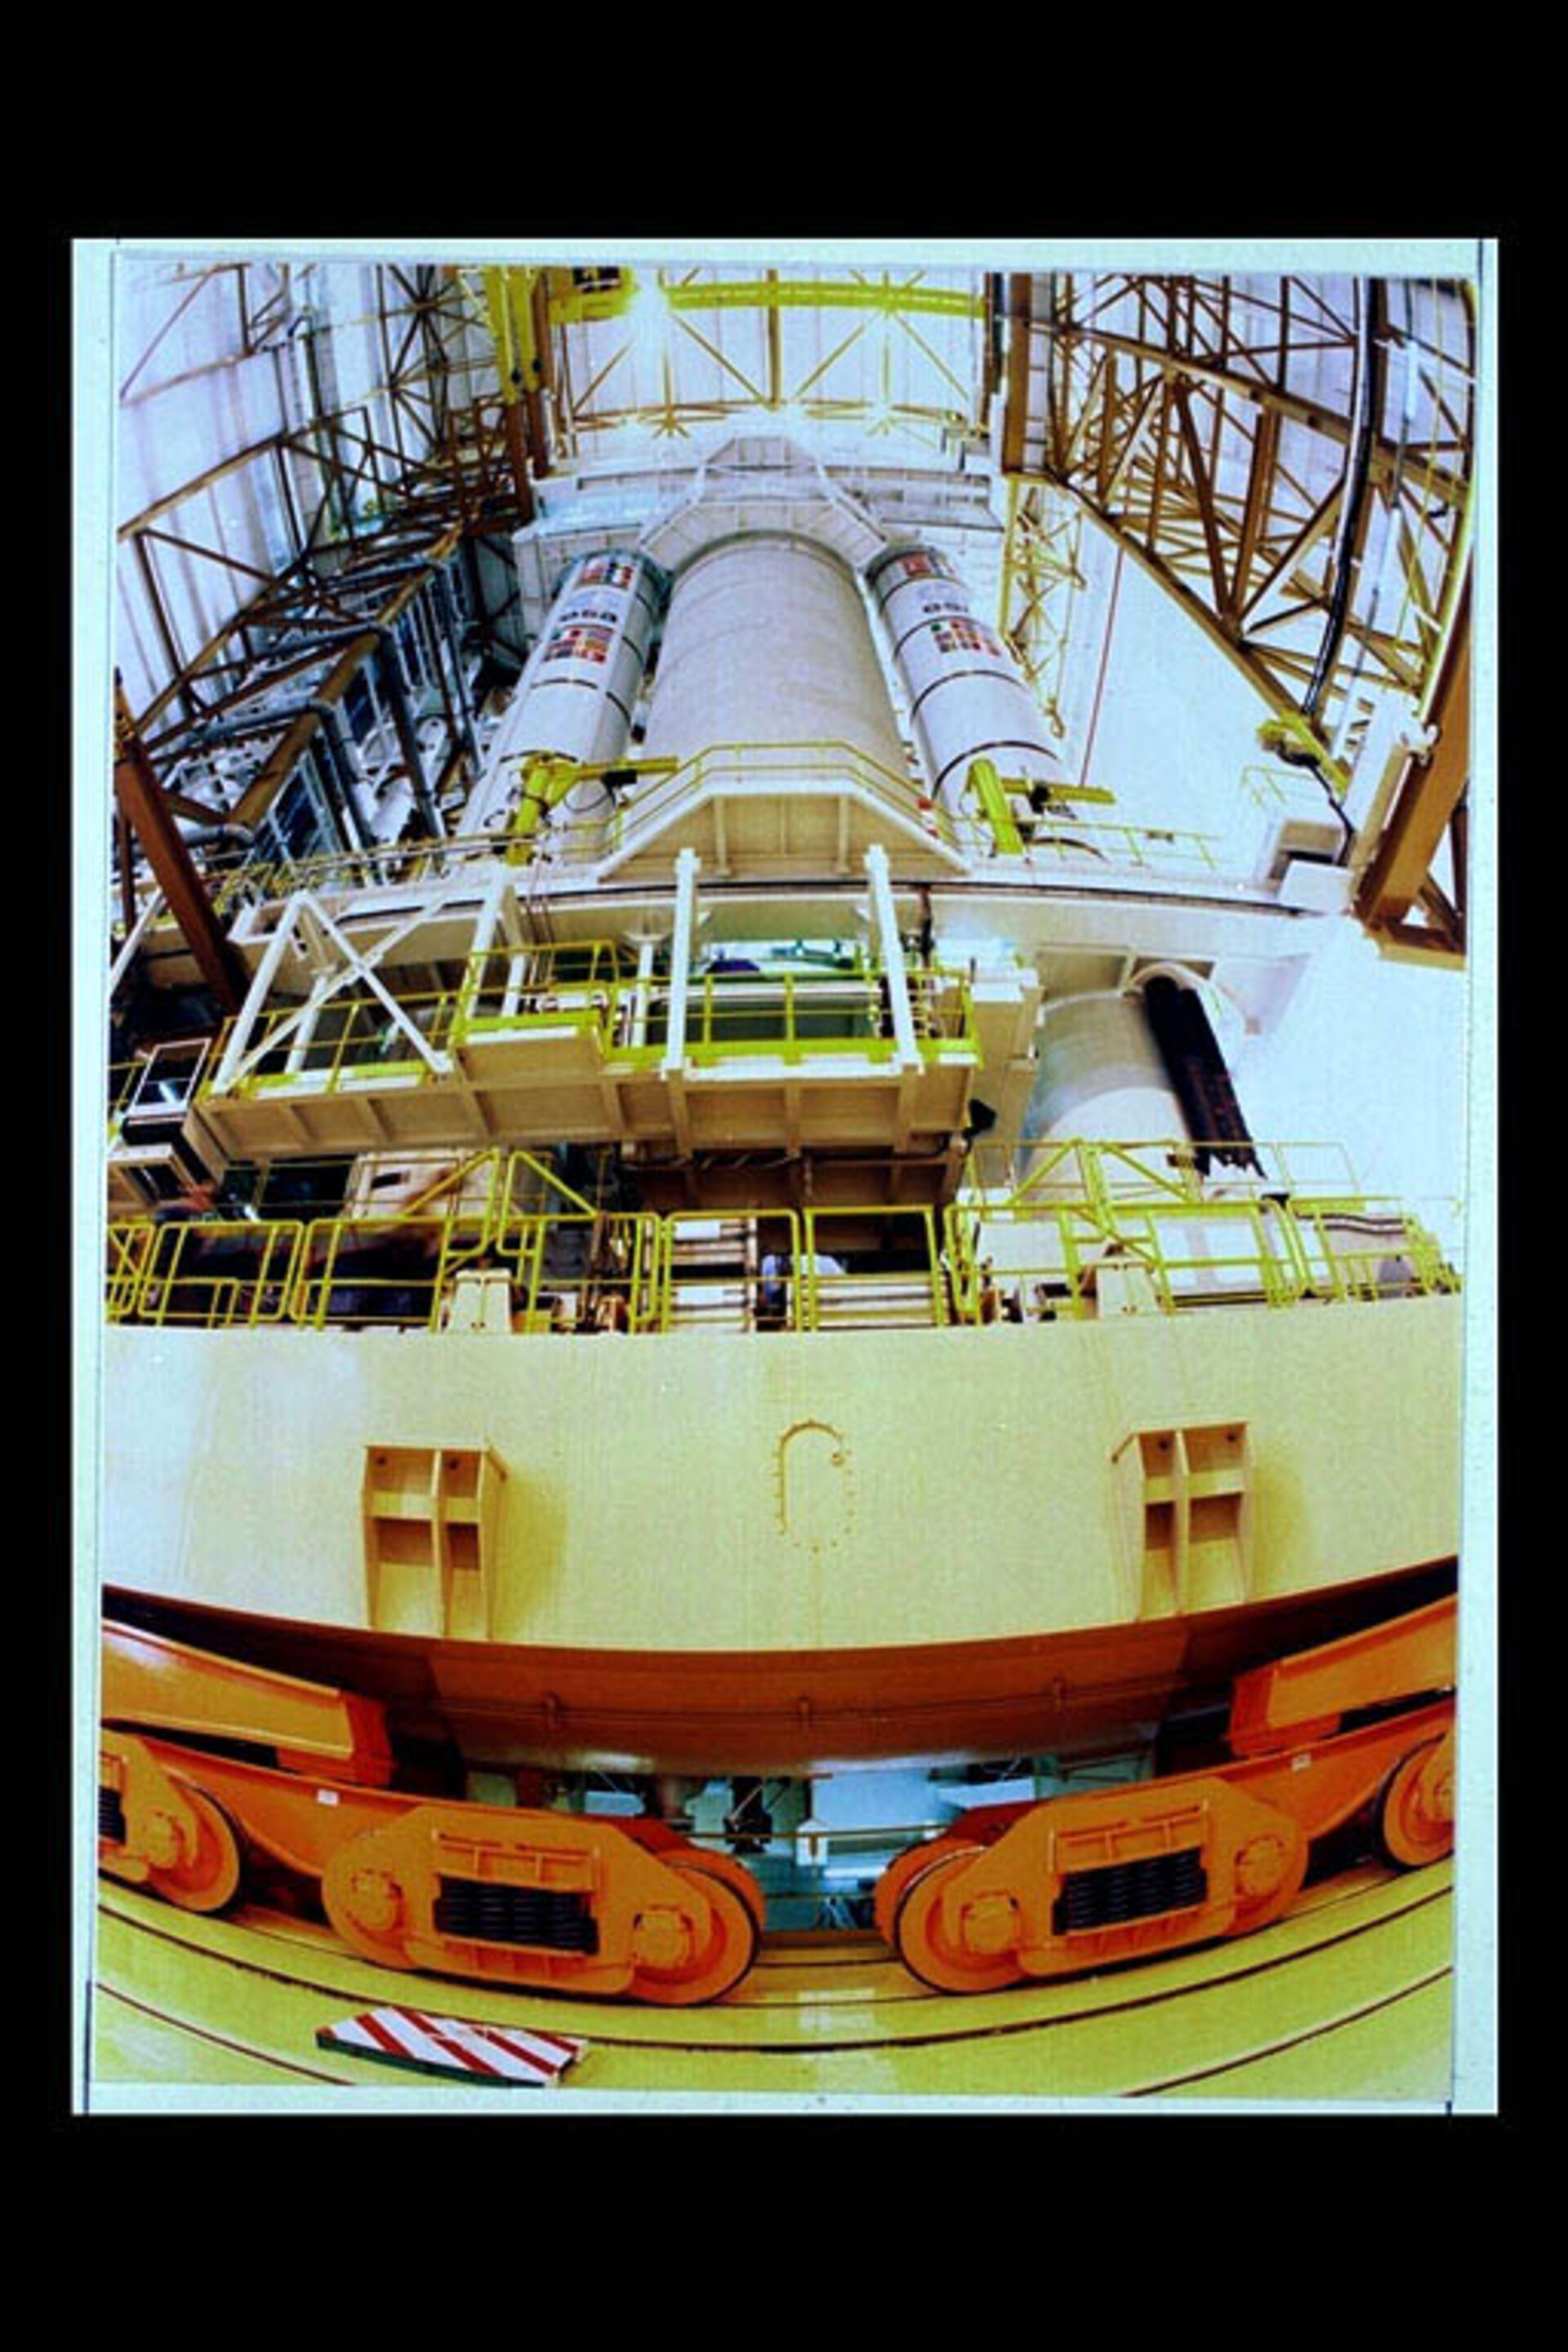 Ariane-5 integrated on mobile launch platform